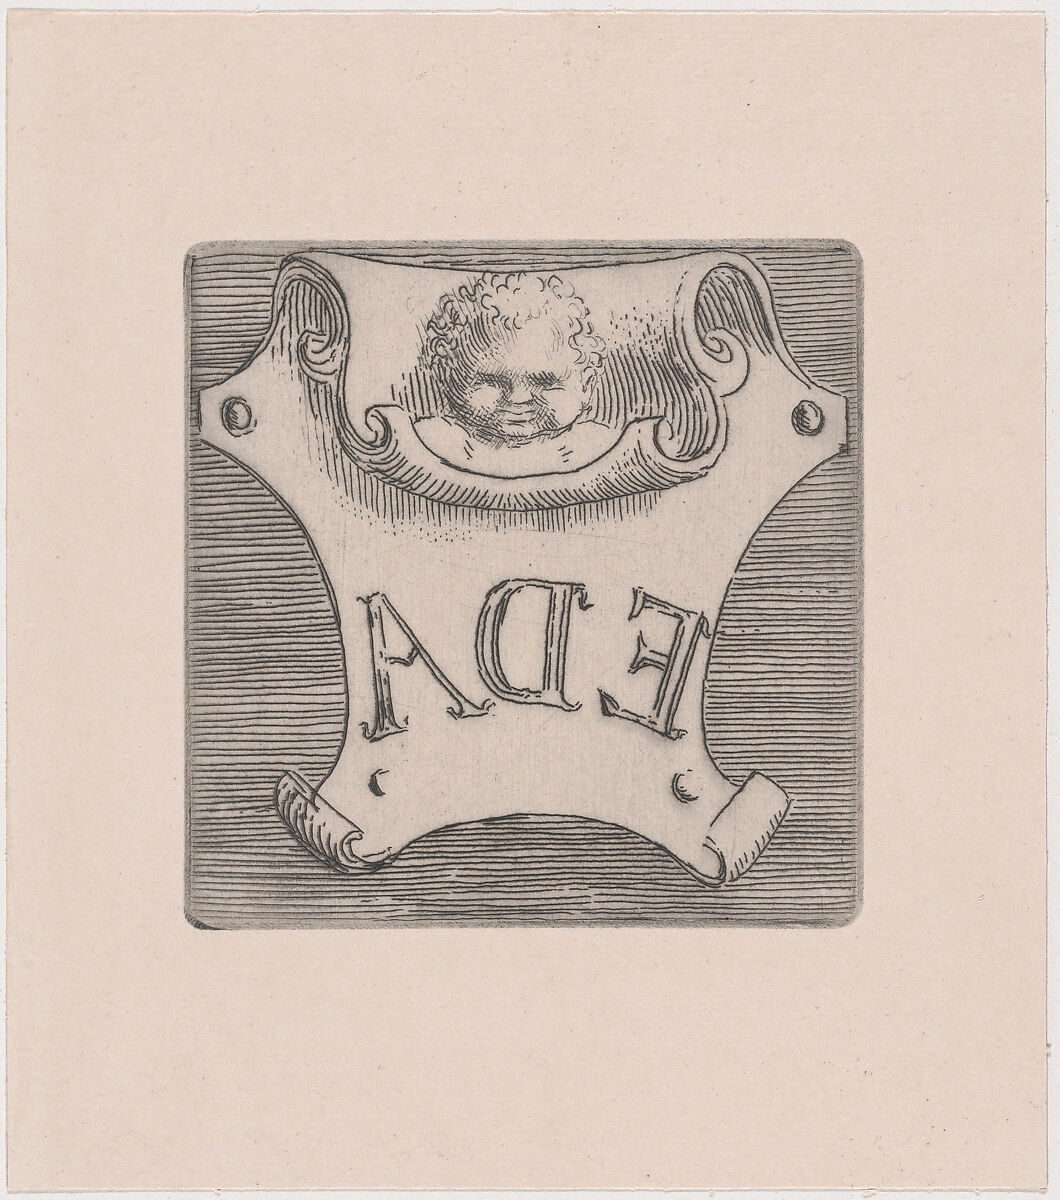 Impression from a name plate for Edward D. Adams, Alphonse Legros (French, Dijon 1837–1911 Watford, Hertfordshire), Etching 